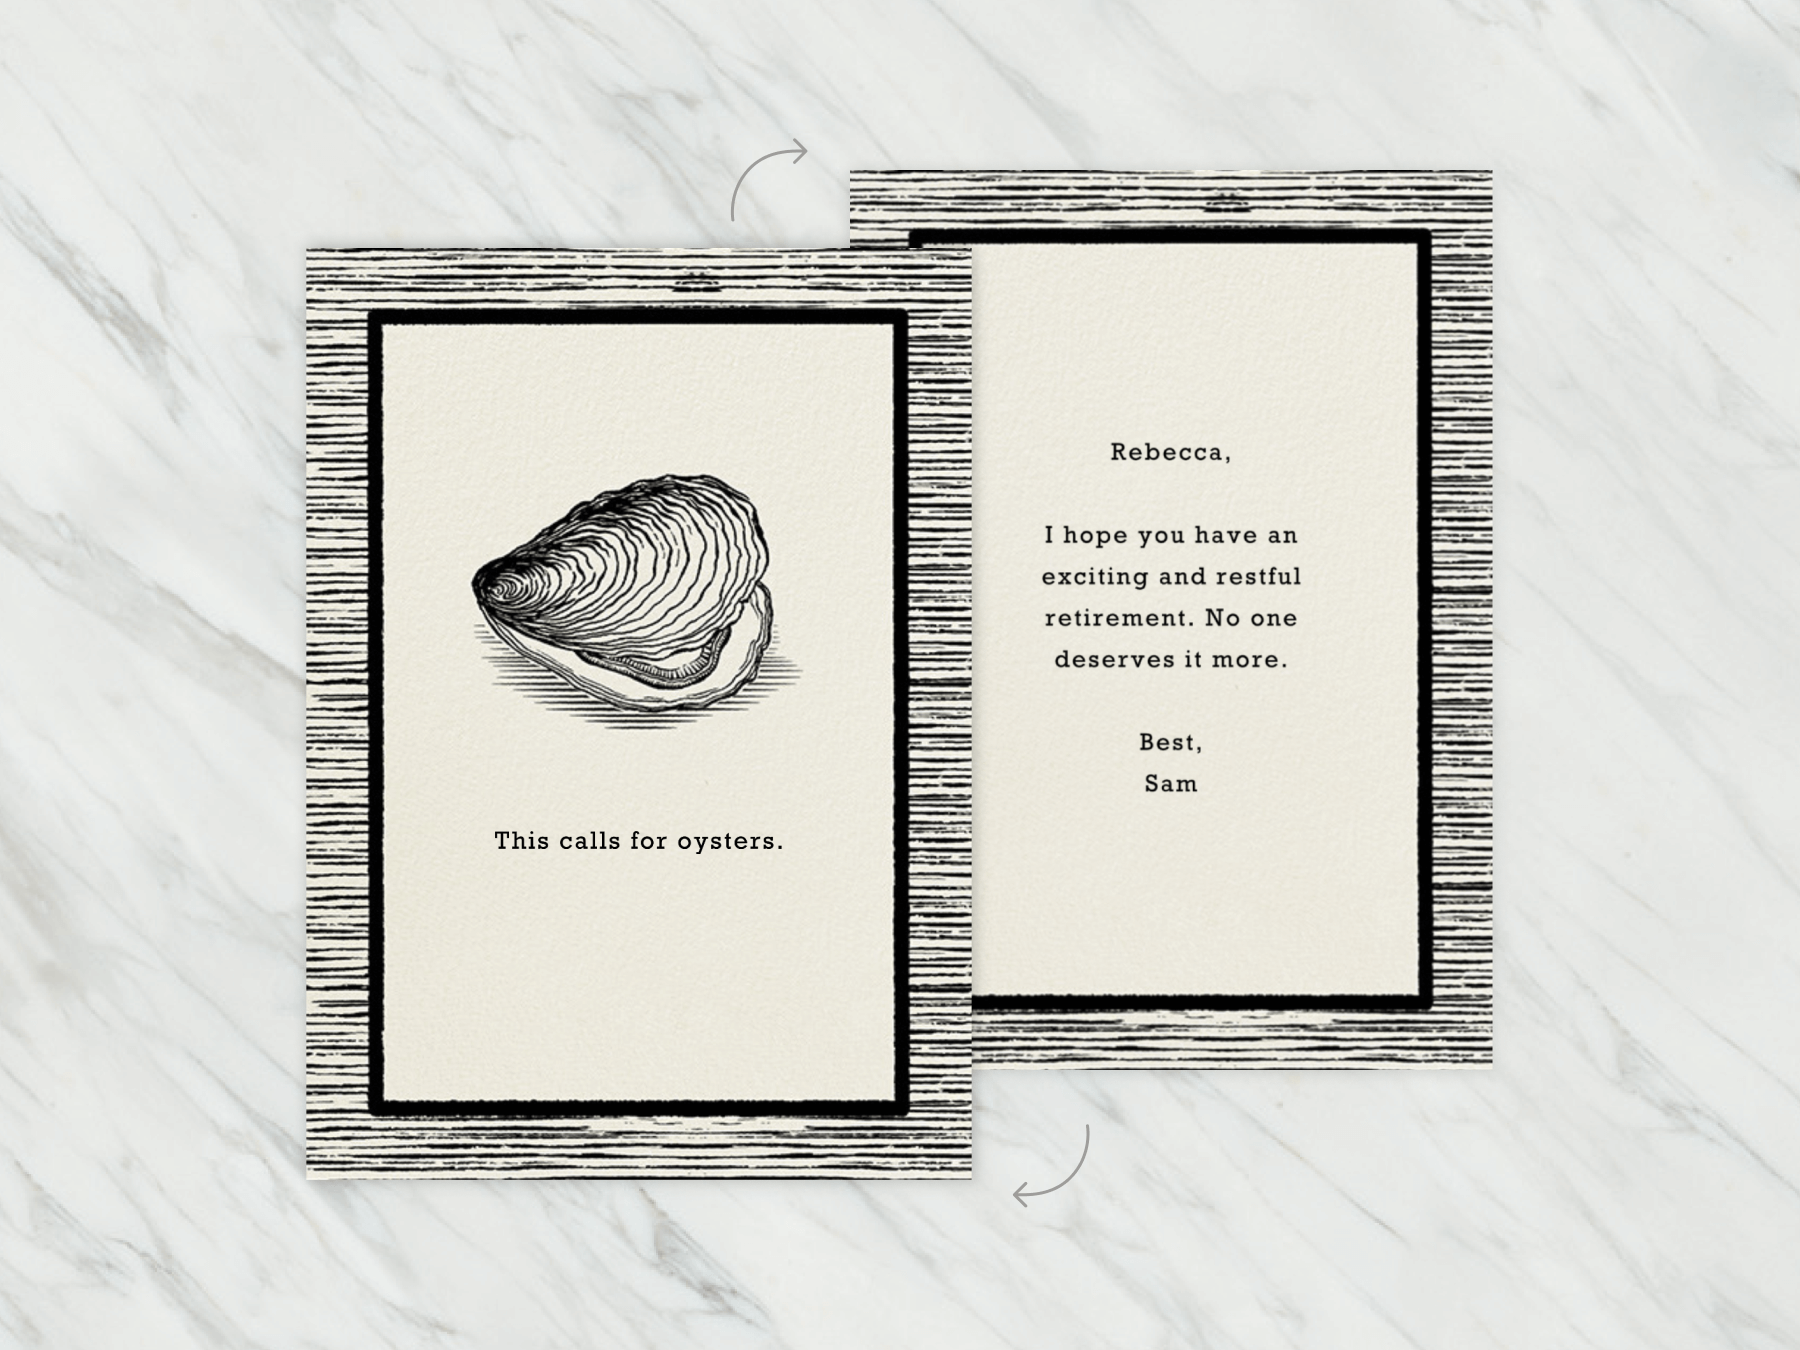 A greeting card with a black line drawing of an oyster reads “This calls for oysters. On the reverse side is a message wishing someone a happy retirement.